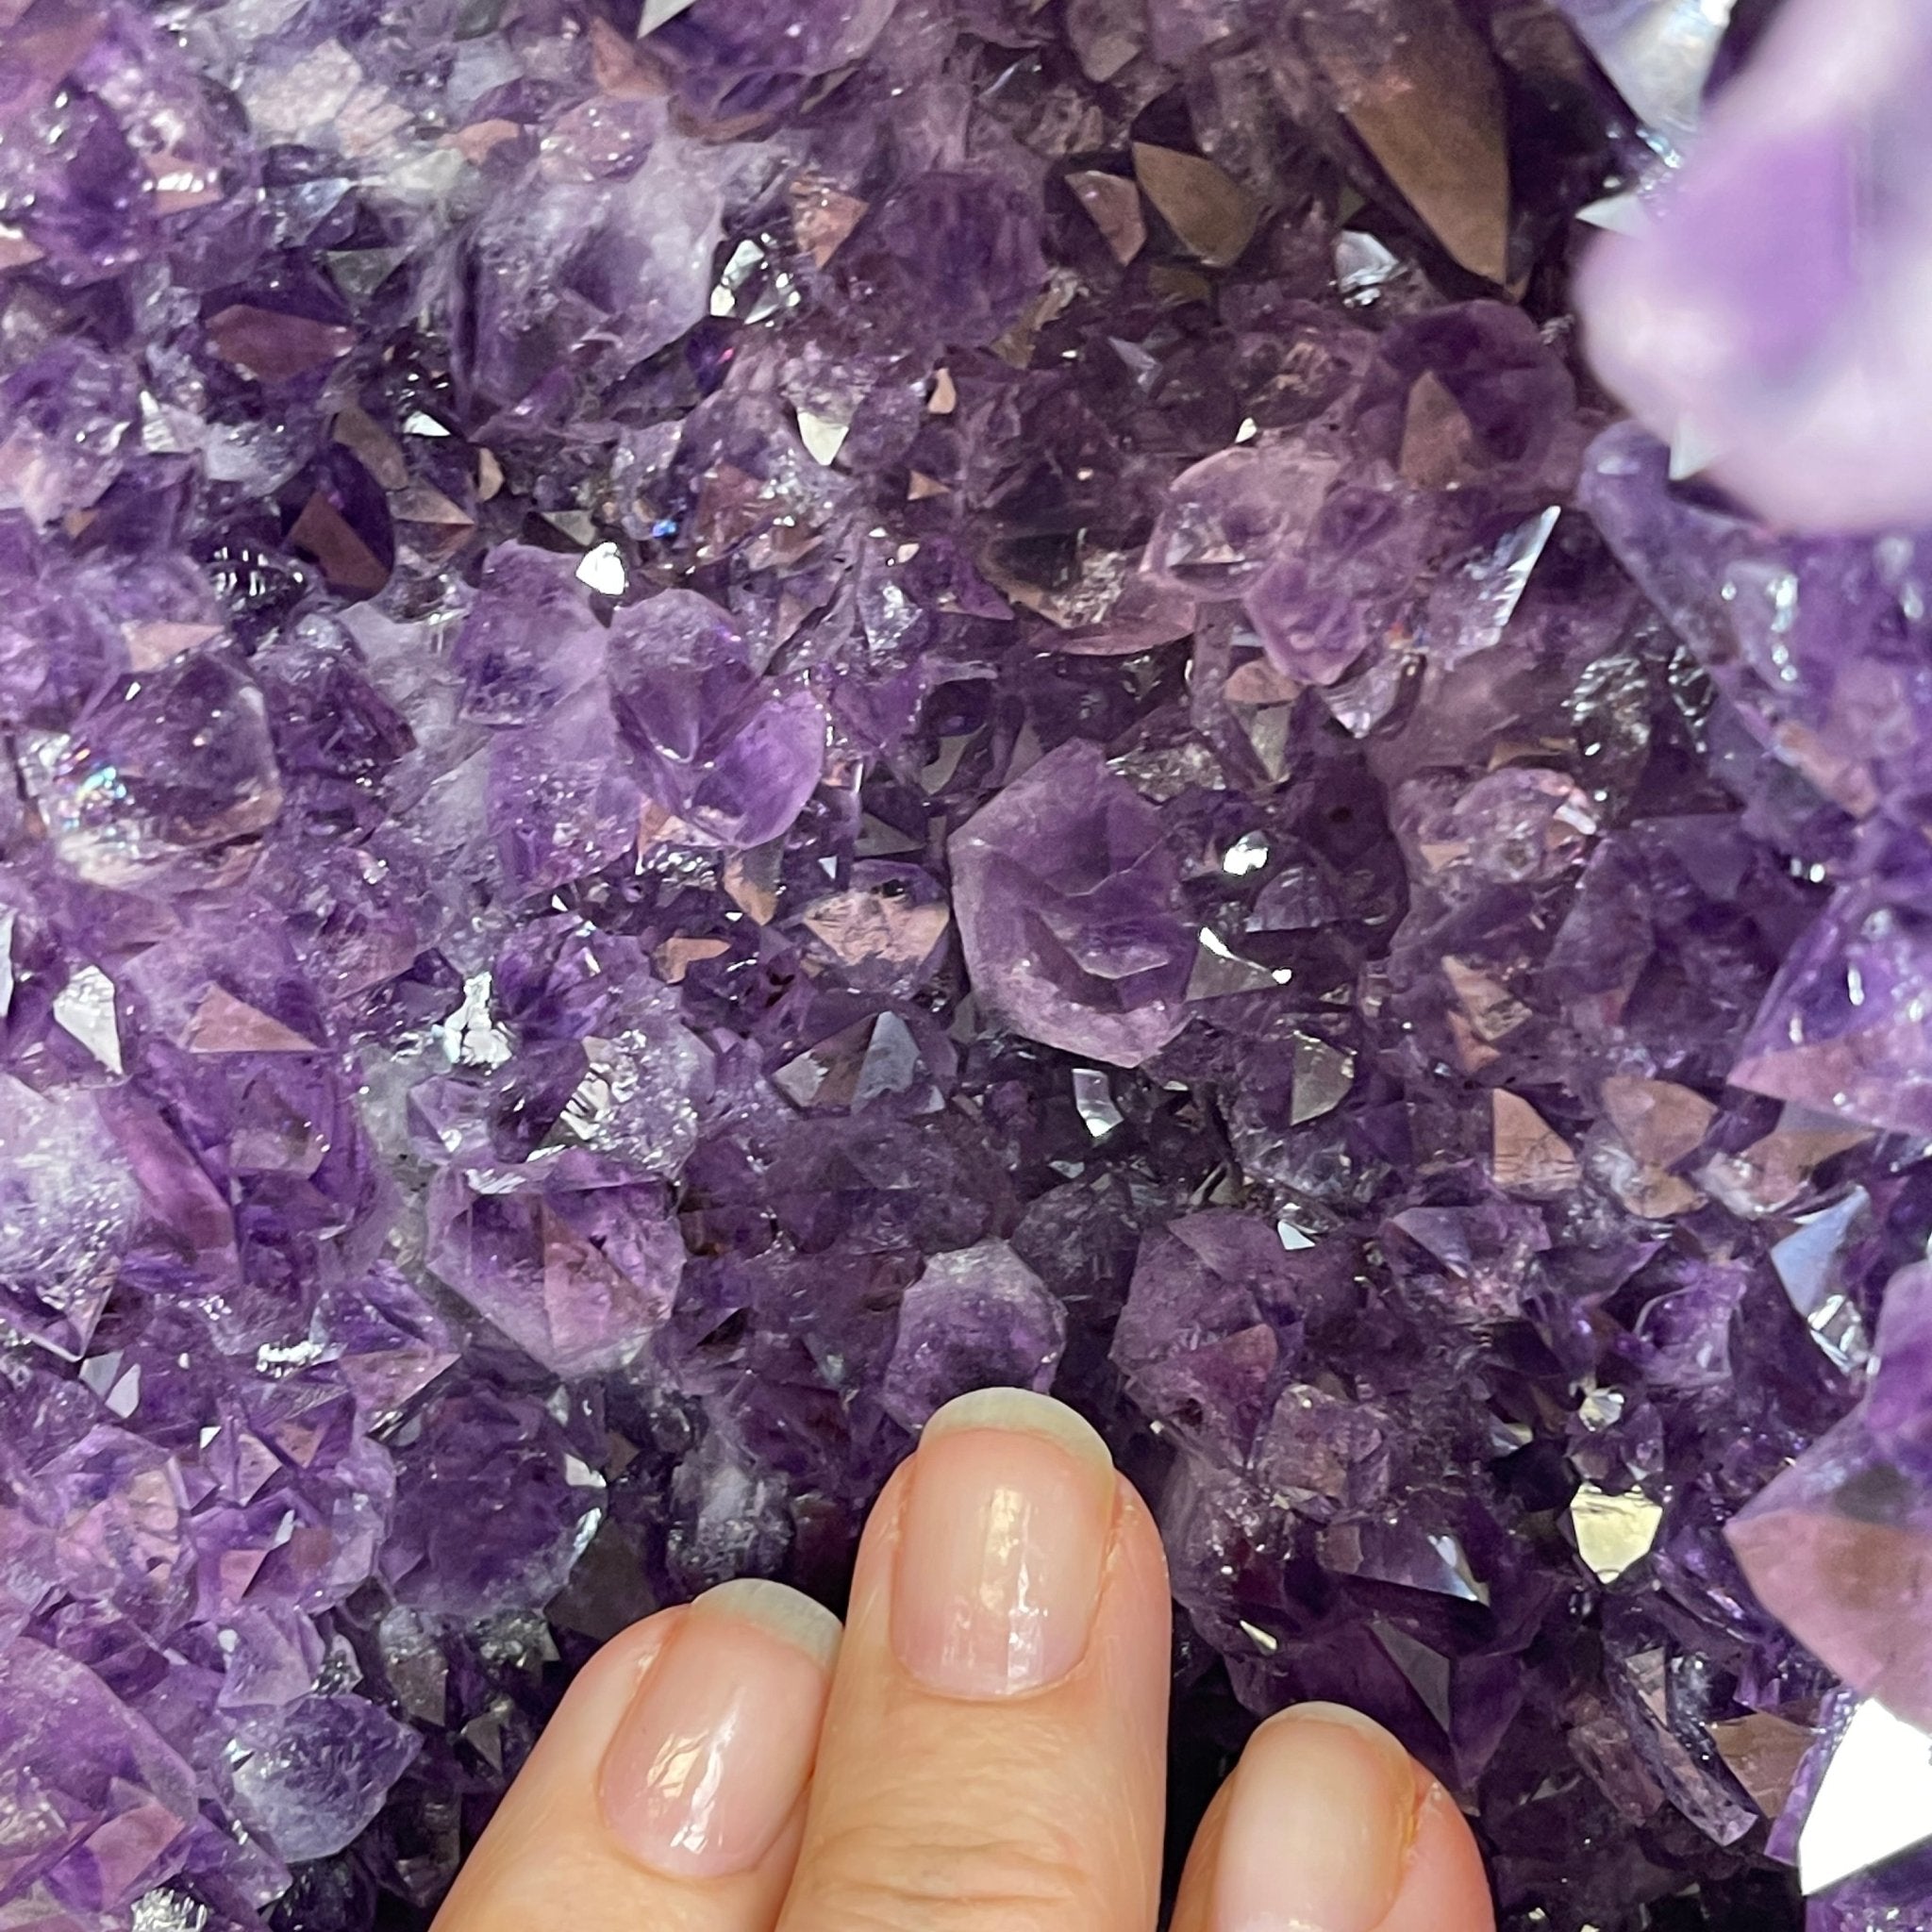 Extra Quality Brazilian Amethyst Cathedral, 12.75” tall & 39.2 lbs #5601-0636 by Brazil Gems - Brazil GemsBrazil GemsExtra Quality Brazilian Amethyst Cathedral, 12.75” tall & 39.2 lbs #5601-0636 by Brazil GemsCathedrals5601-0636